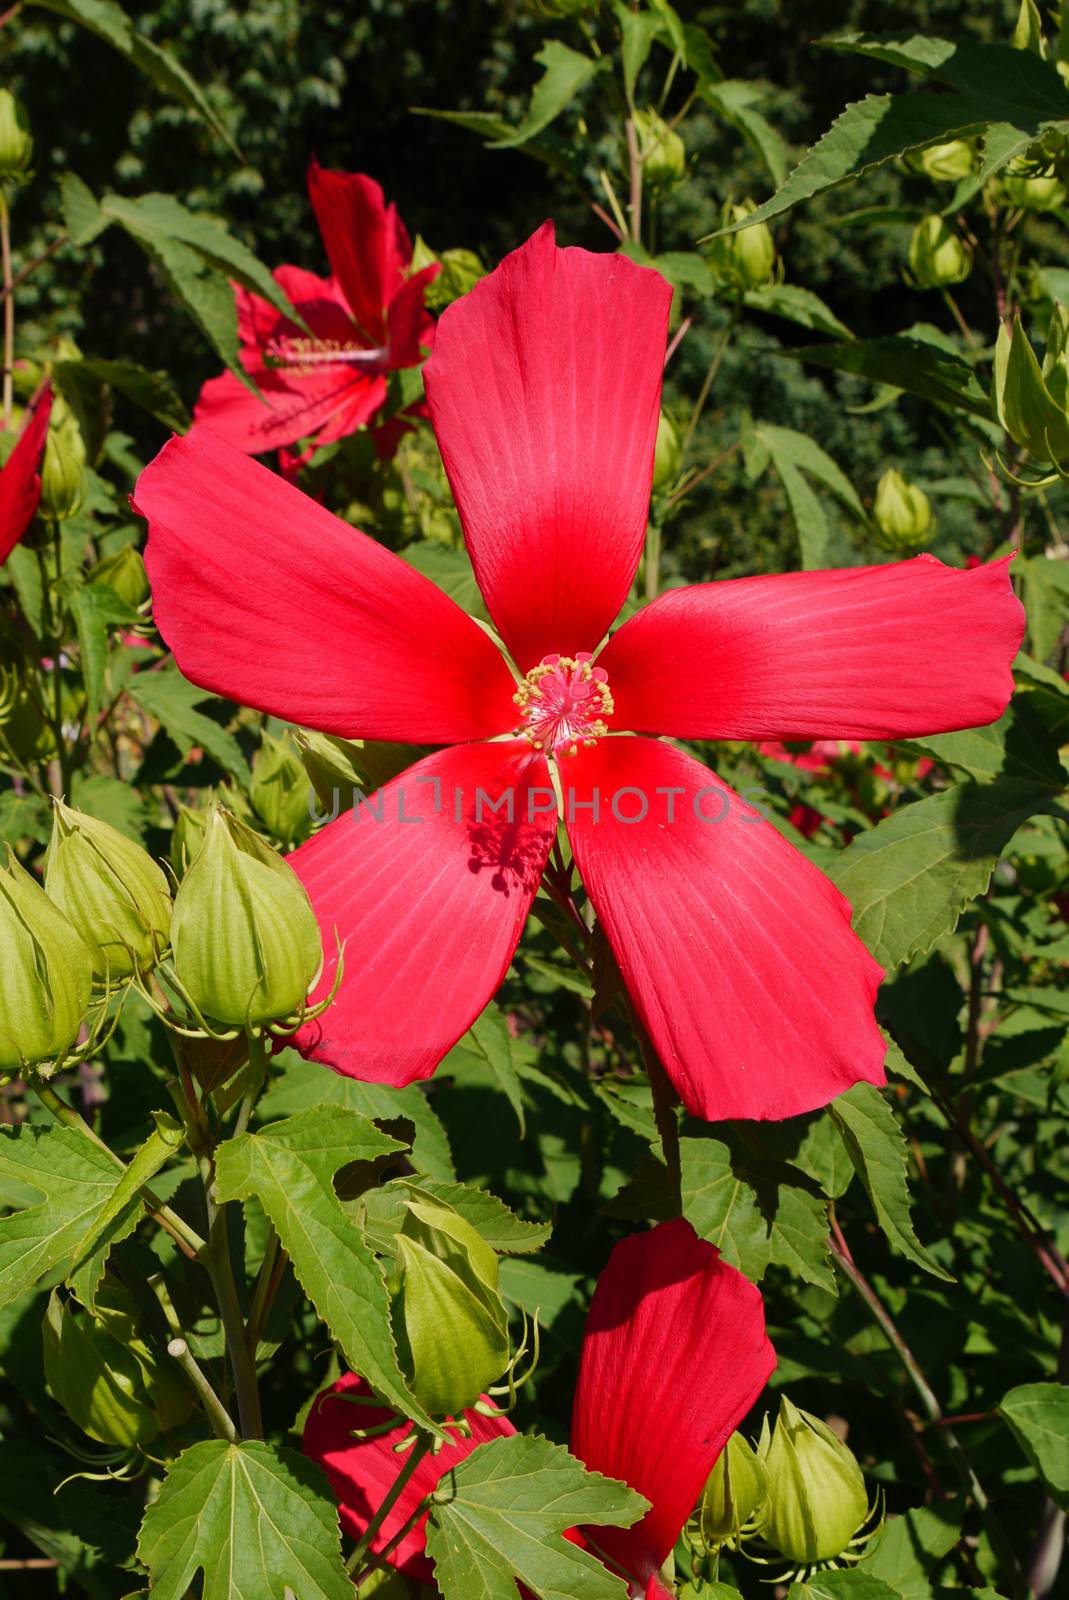 red flower in the form of a star and three unexplored buds